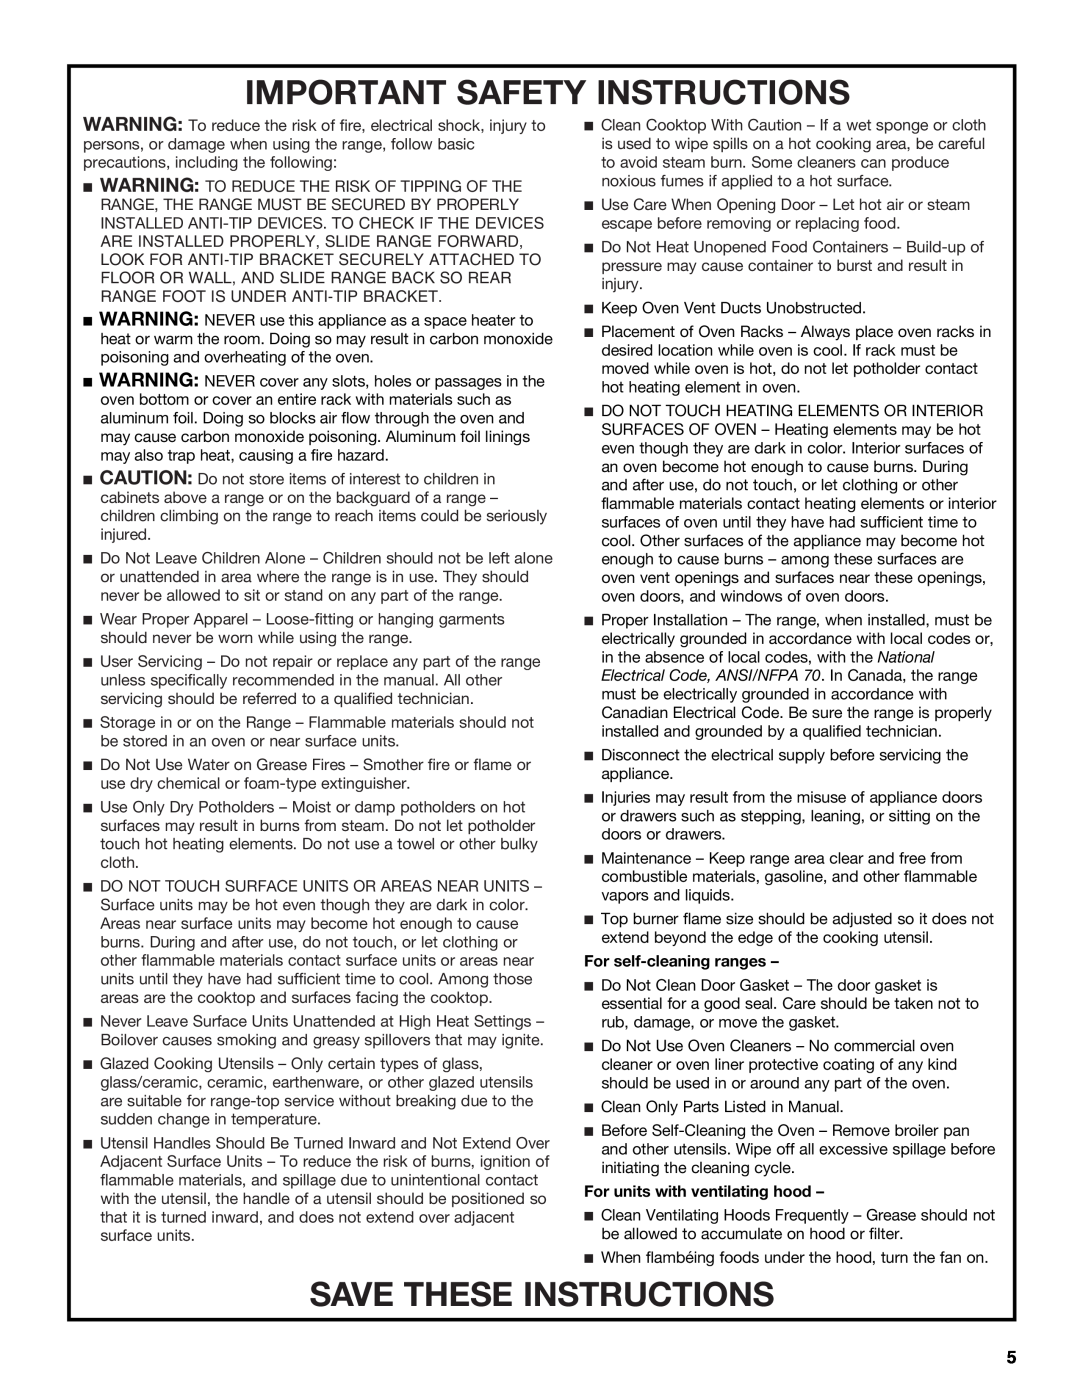 Jenn-Air JDS8860 manual Important Safety Instructions, Save These Instructions, For self-cleaningranges 